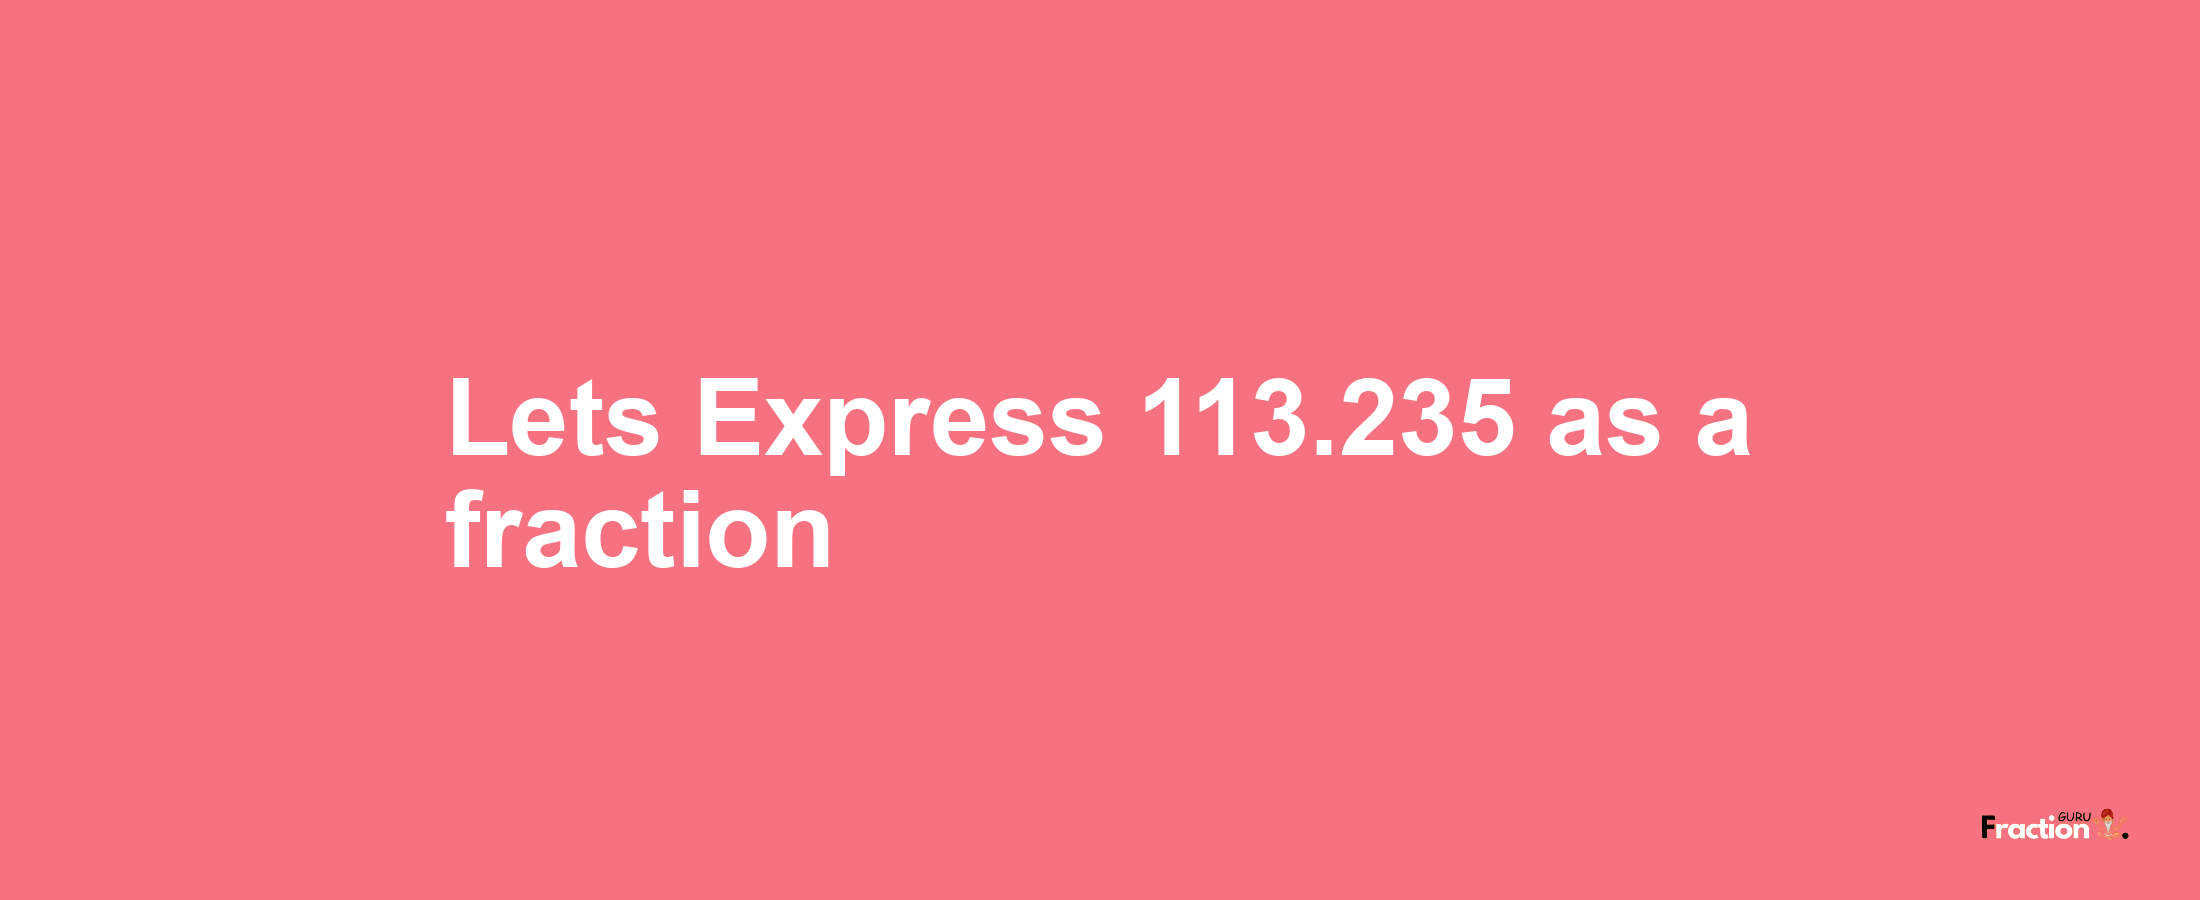 Lets Express 113.235 as afraction